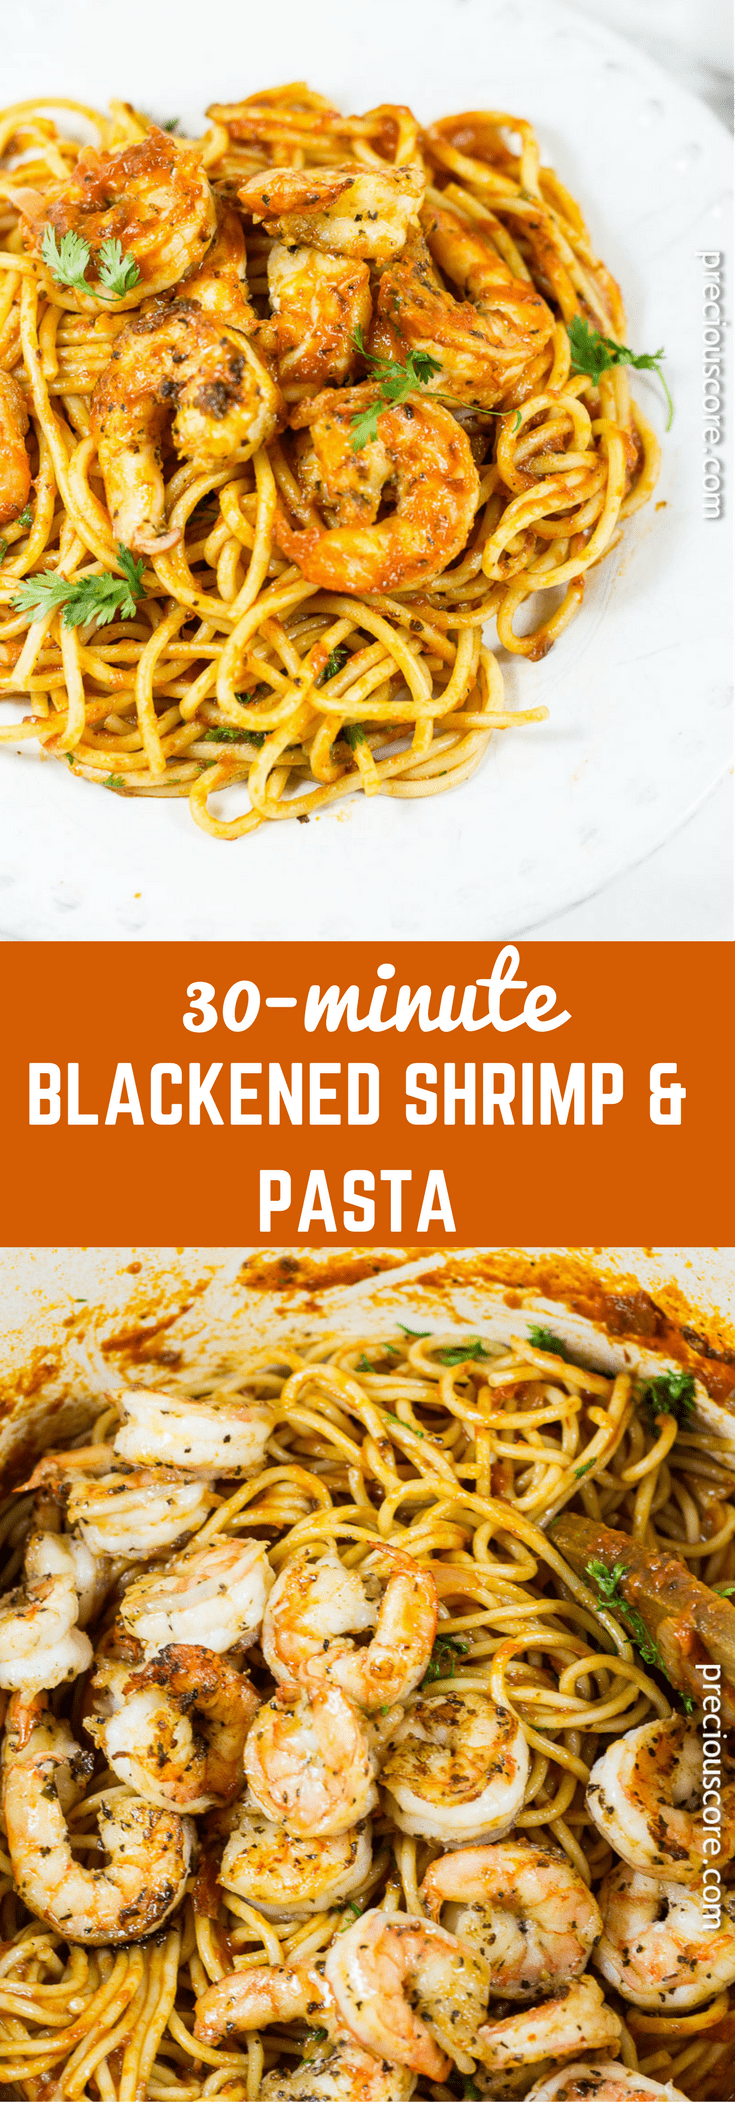 Blackened shrimp pasta - a flavorful pasta dinner made in 30 minutes. 